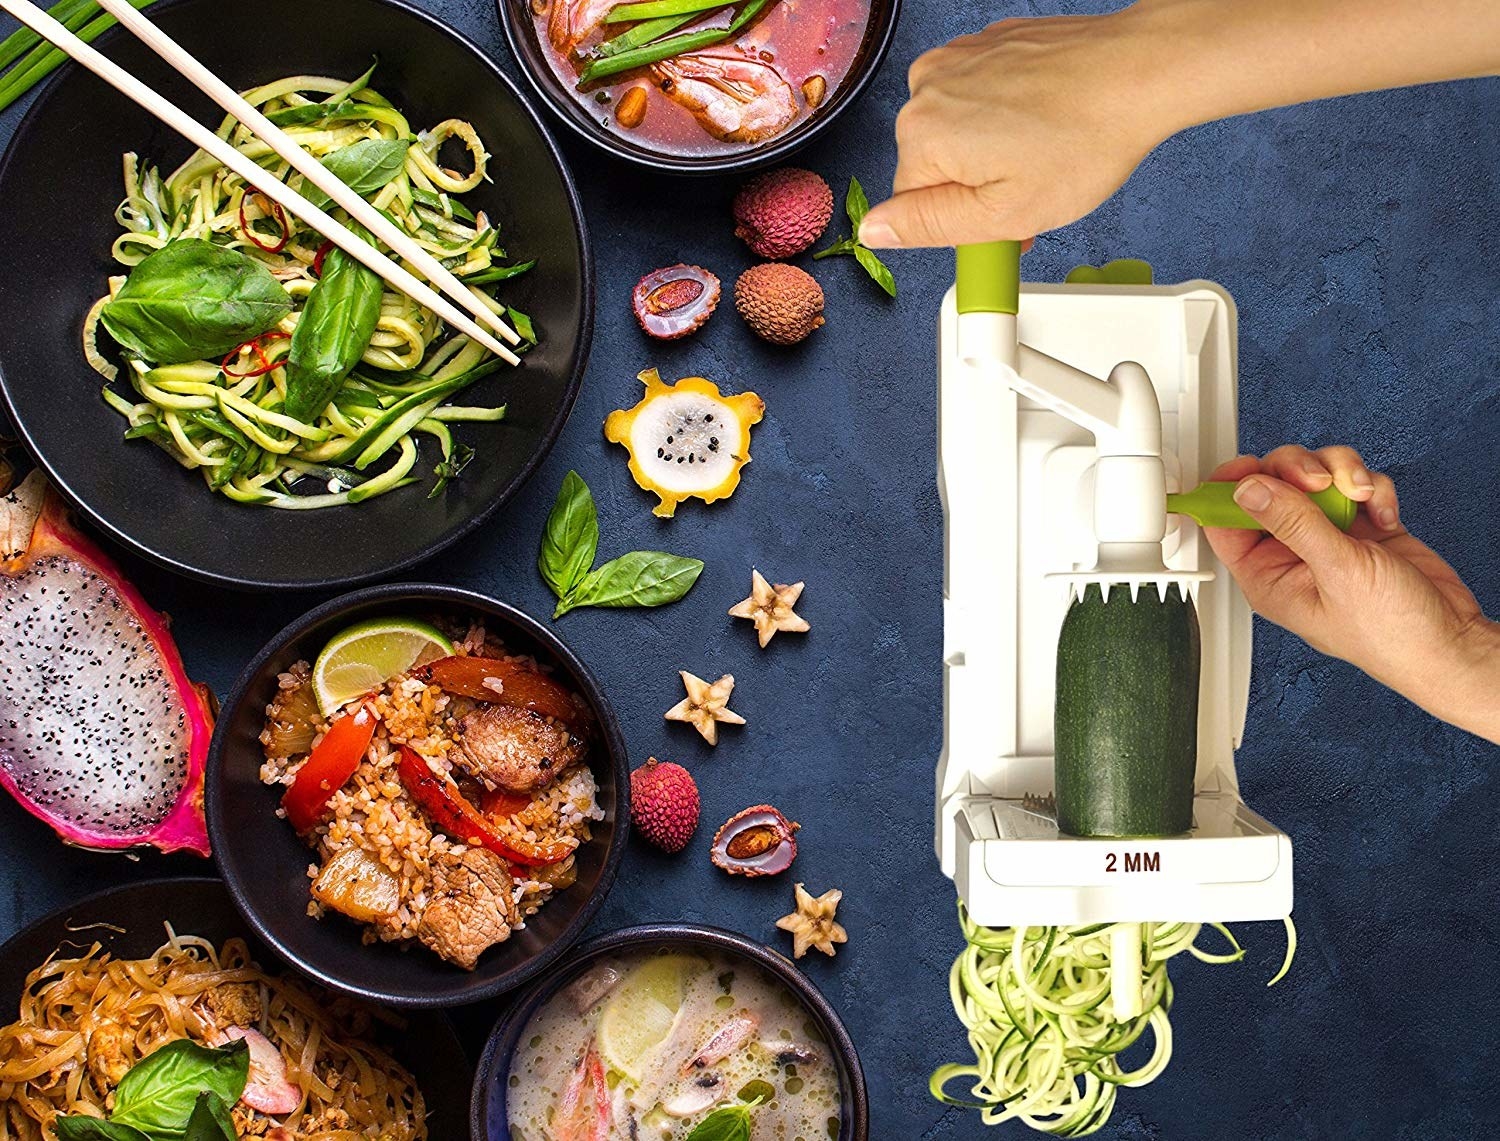 13 Small Kitchen Appliances & Gadgets That Give Tiny Kitchens More Function